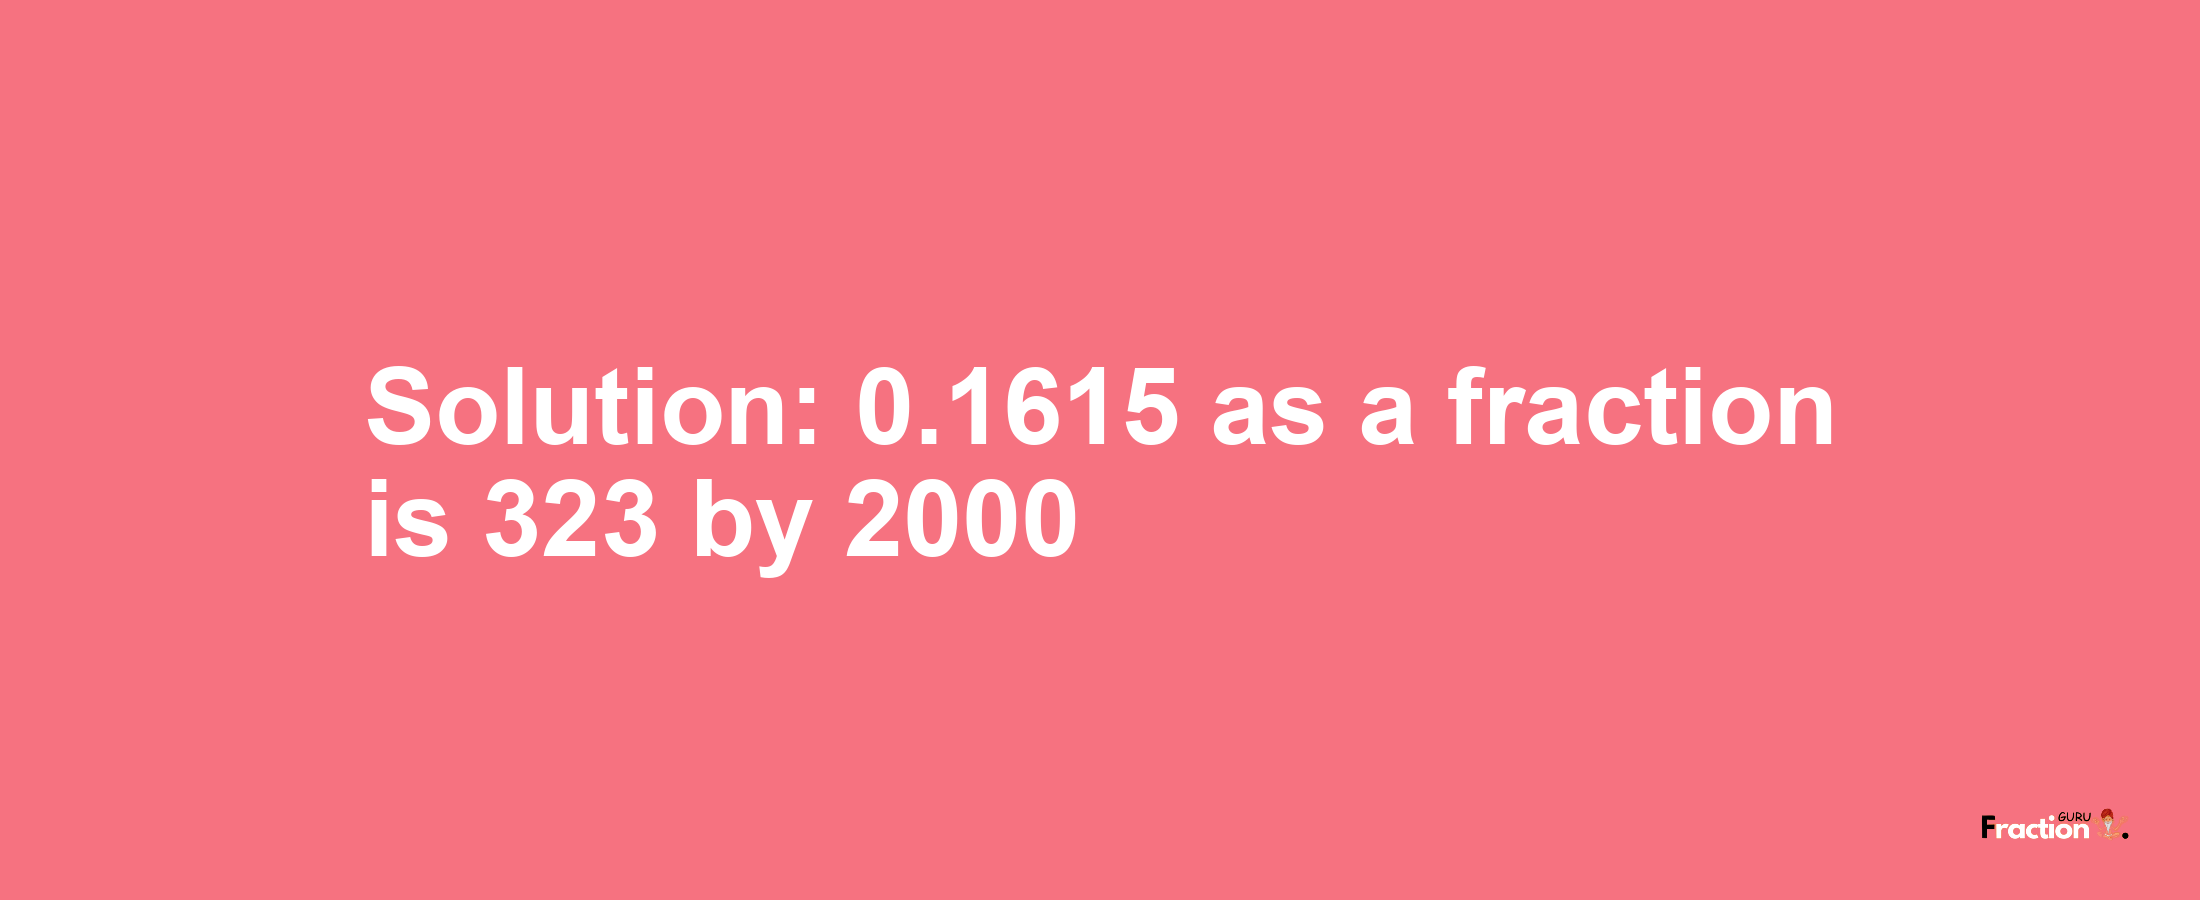 Solution:0.1615 as a fraction is 323/2000